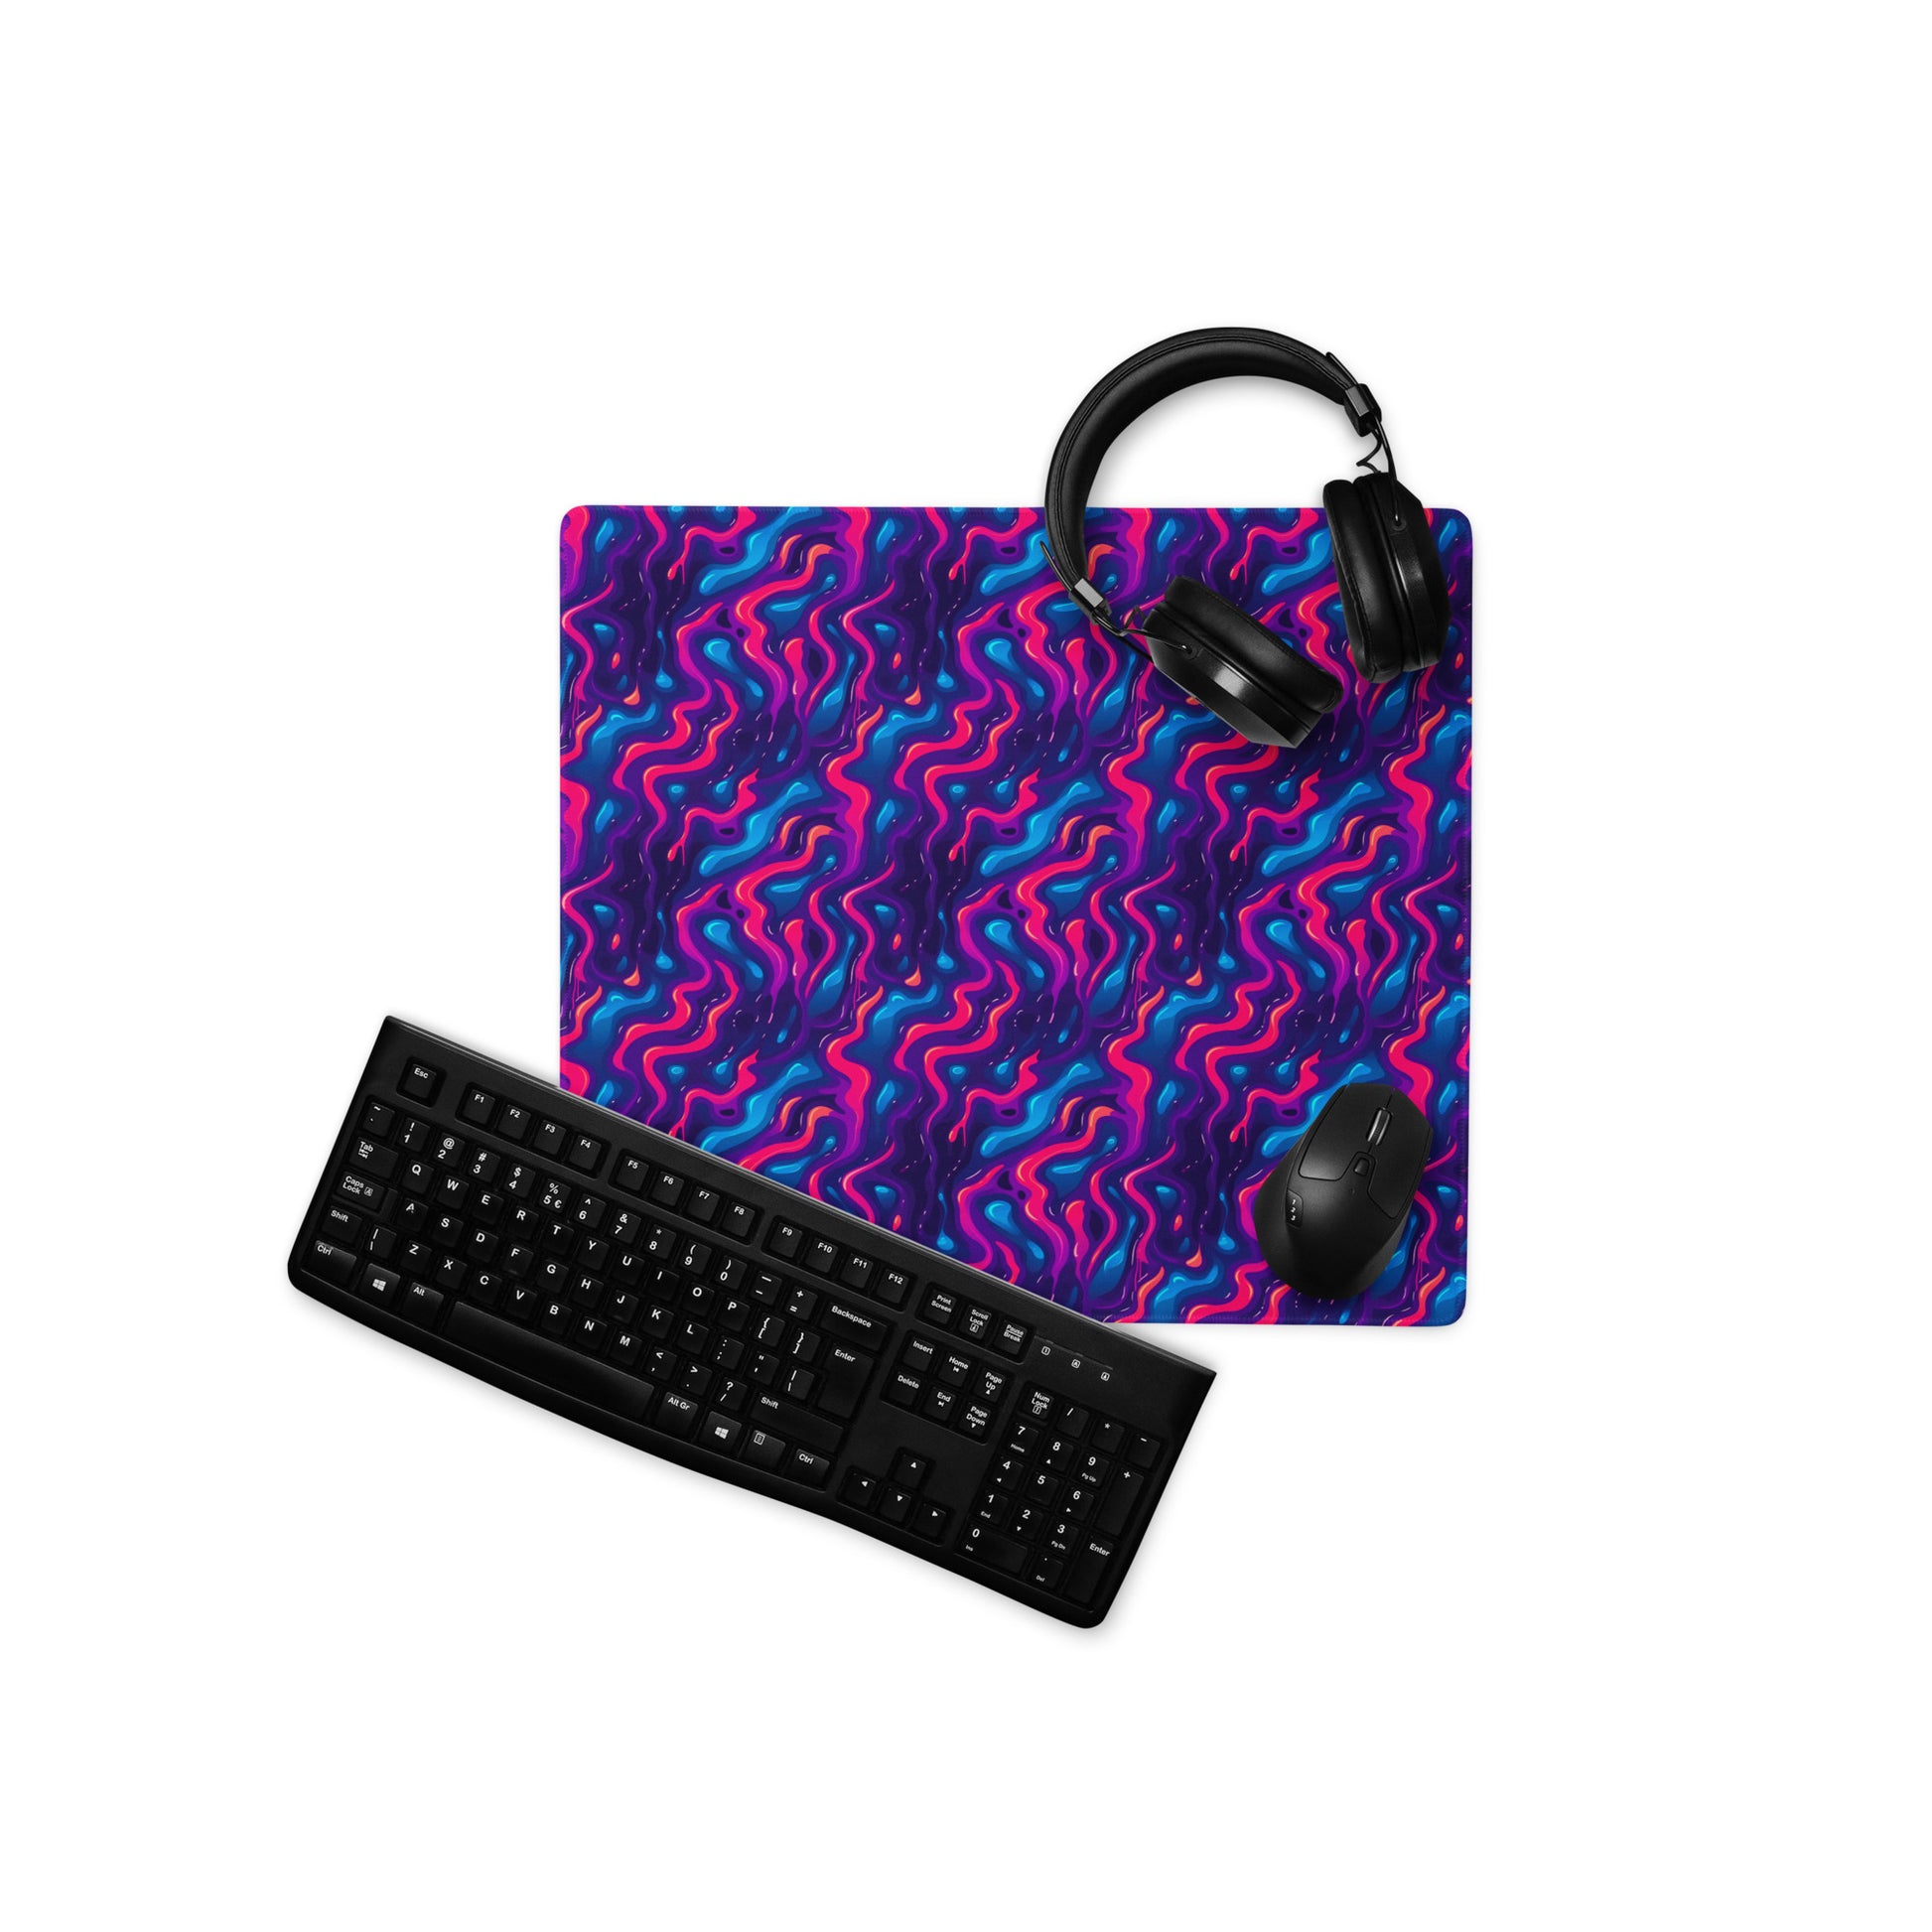 A 18" x 16" desk pad with a pink, blue and purple wavy pattern. With a keyboard, mouse, and headphones sitting on it.